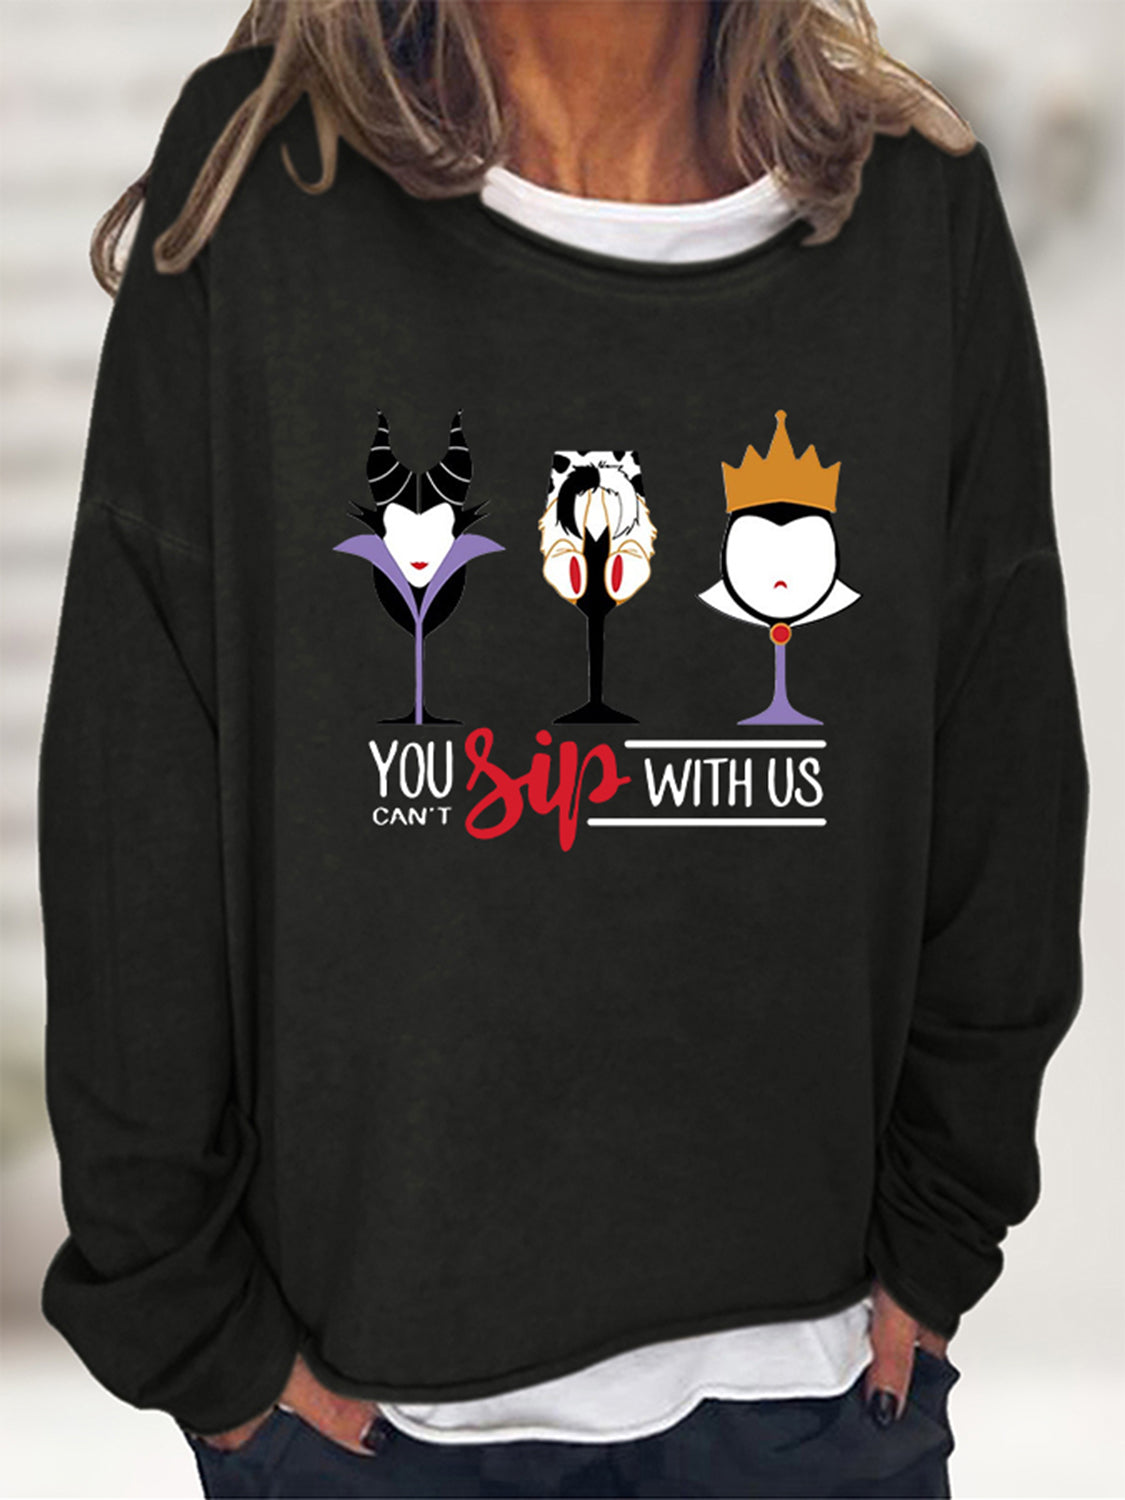 YOU CAN’T SIP WITH US Graphic Sweatshirt - Black / S - T-Shirts - Shirts & Tops - 4 - 2024